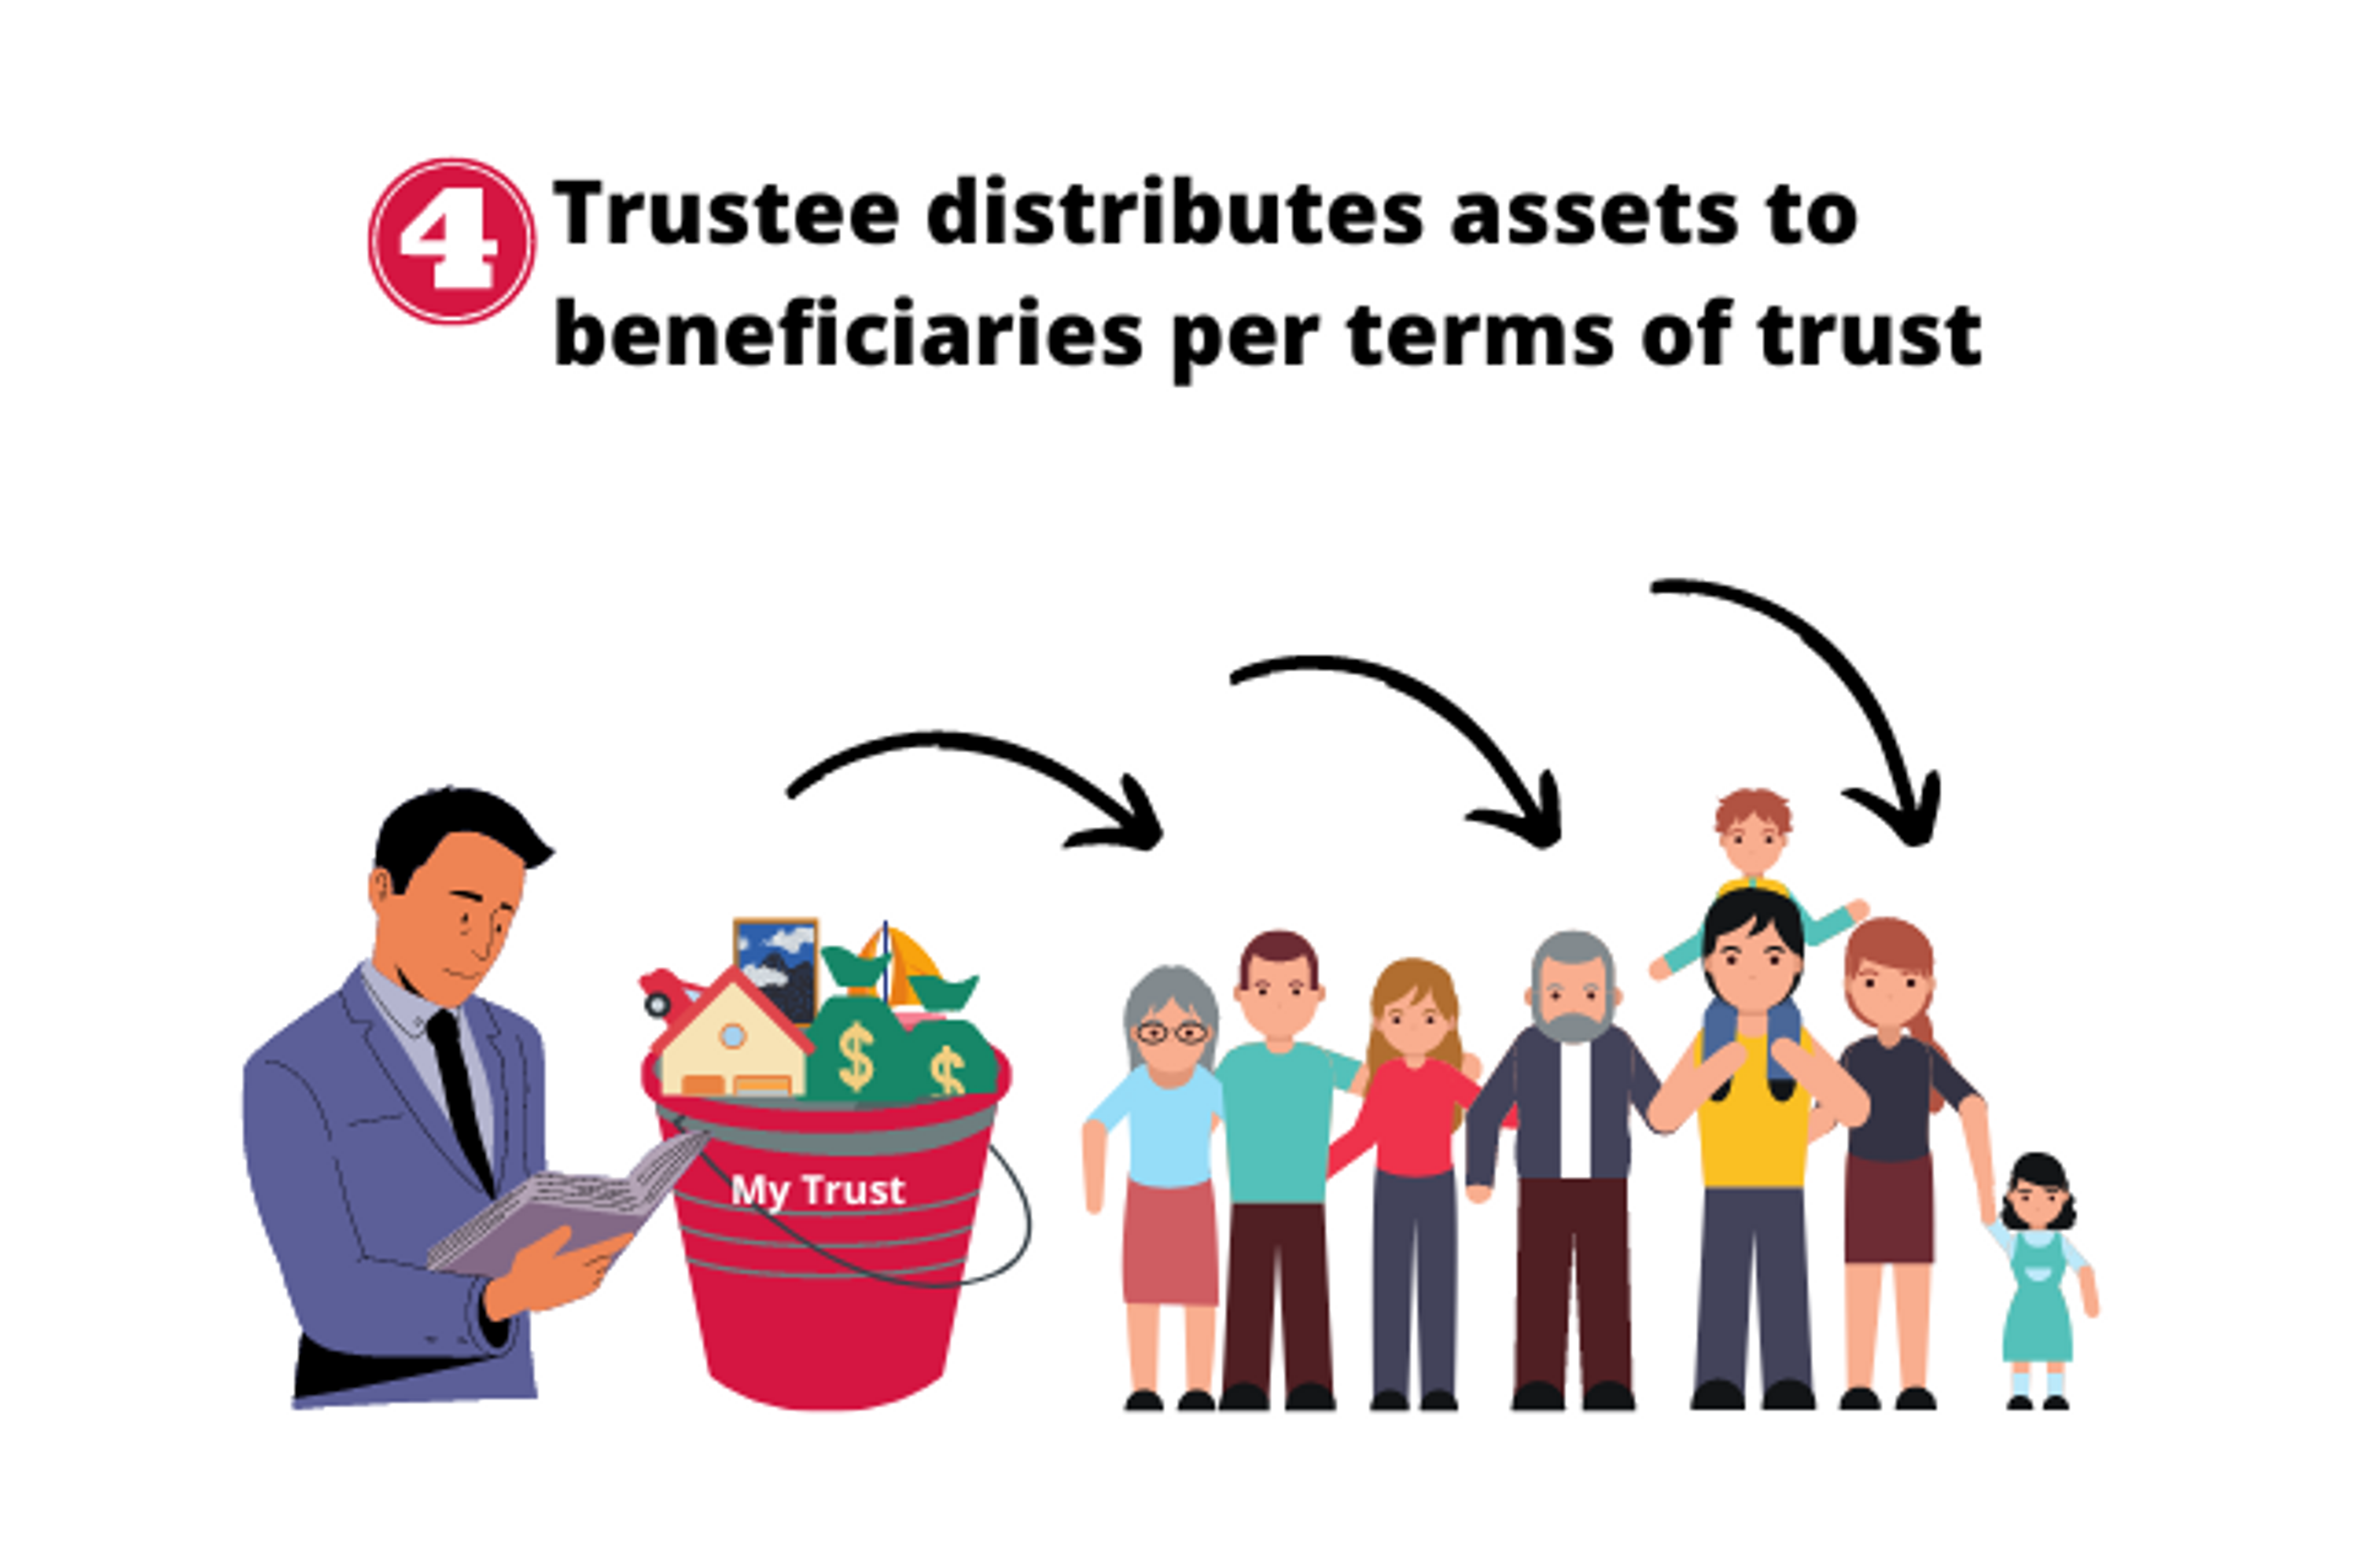 Step 4: trustee distributes assets to beneficiaries according to the terms of the trust agreement